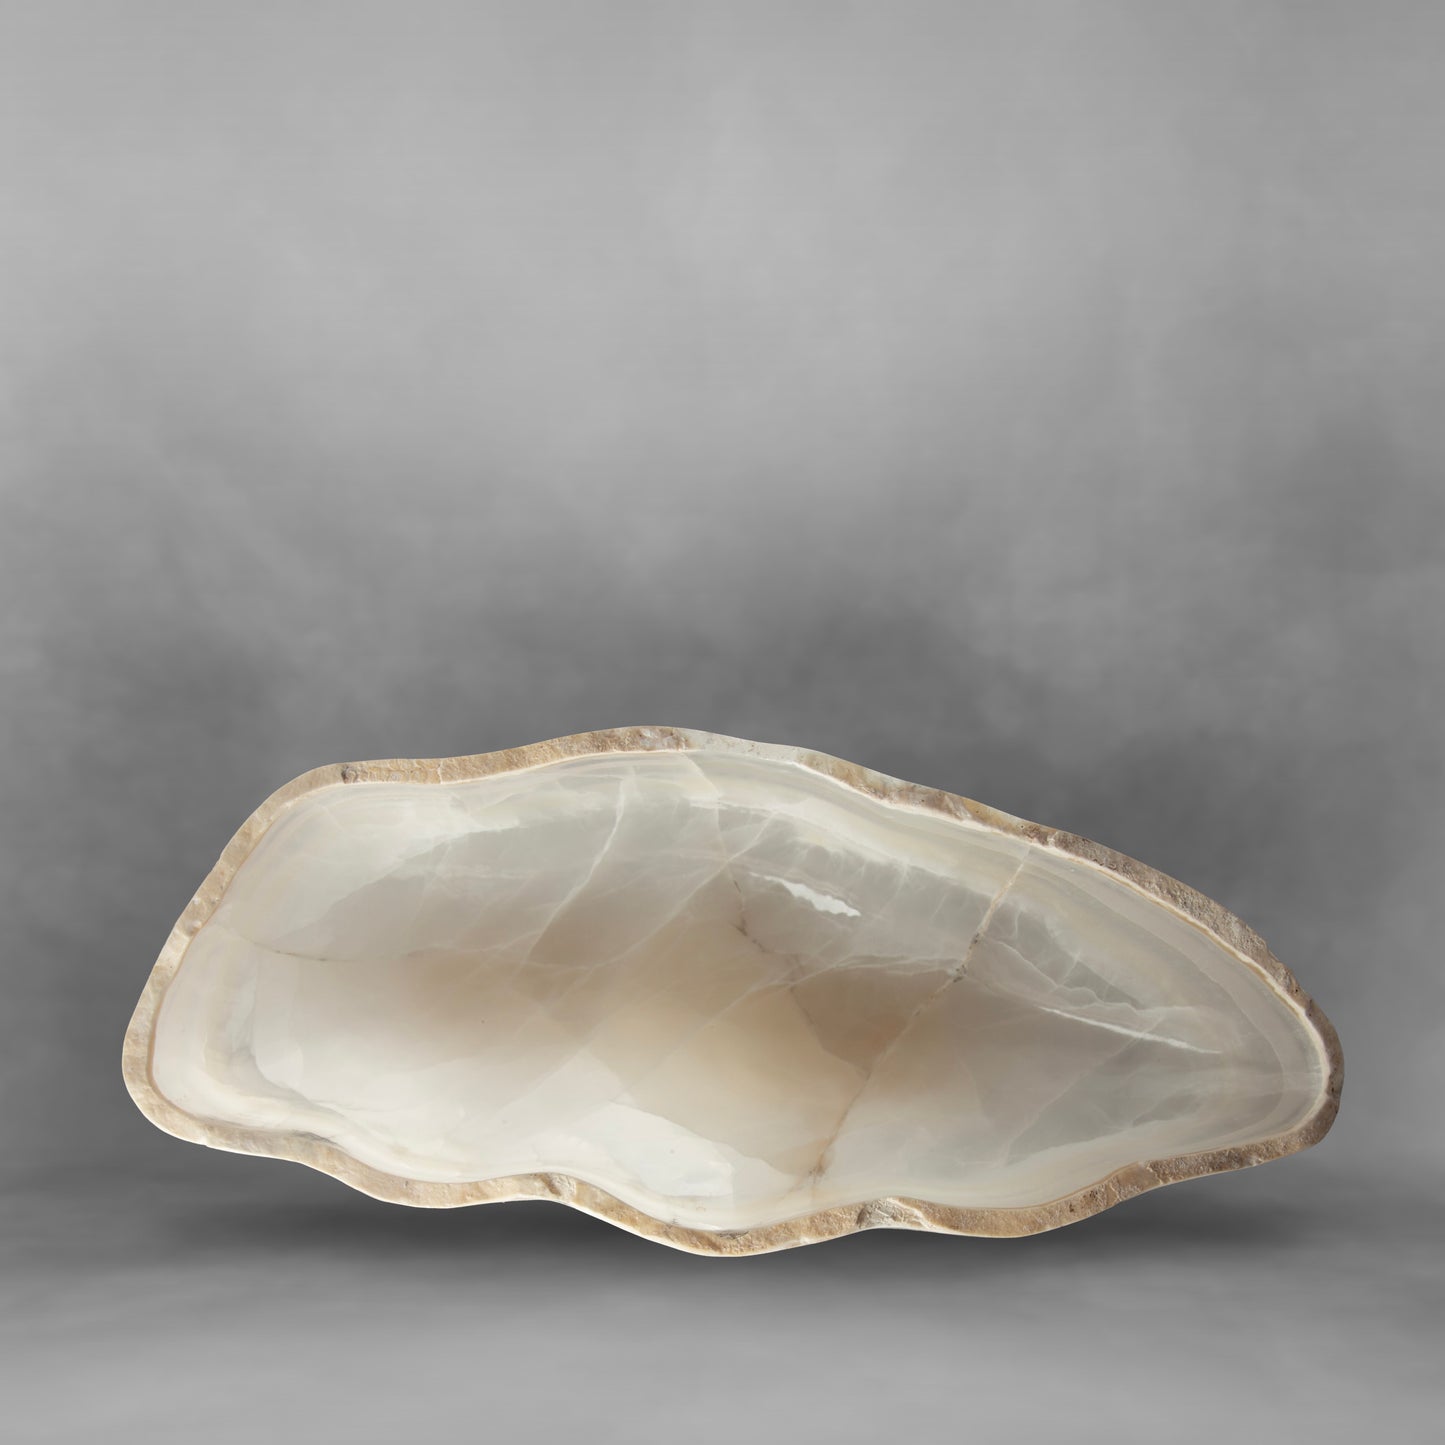 White & Pearl Series 37, amazing onyx canoe with natural forms